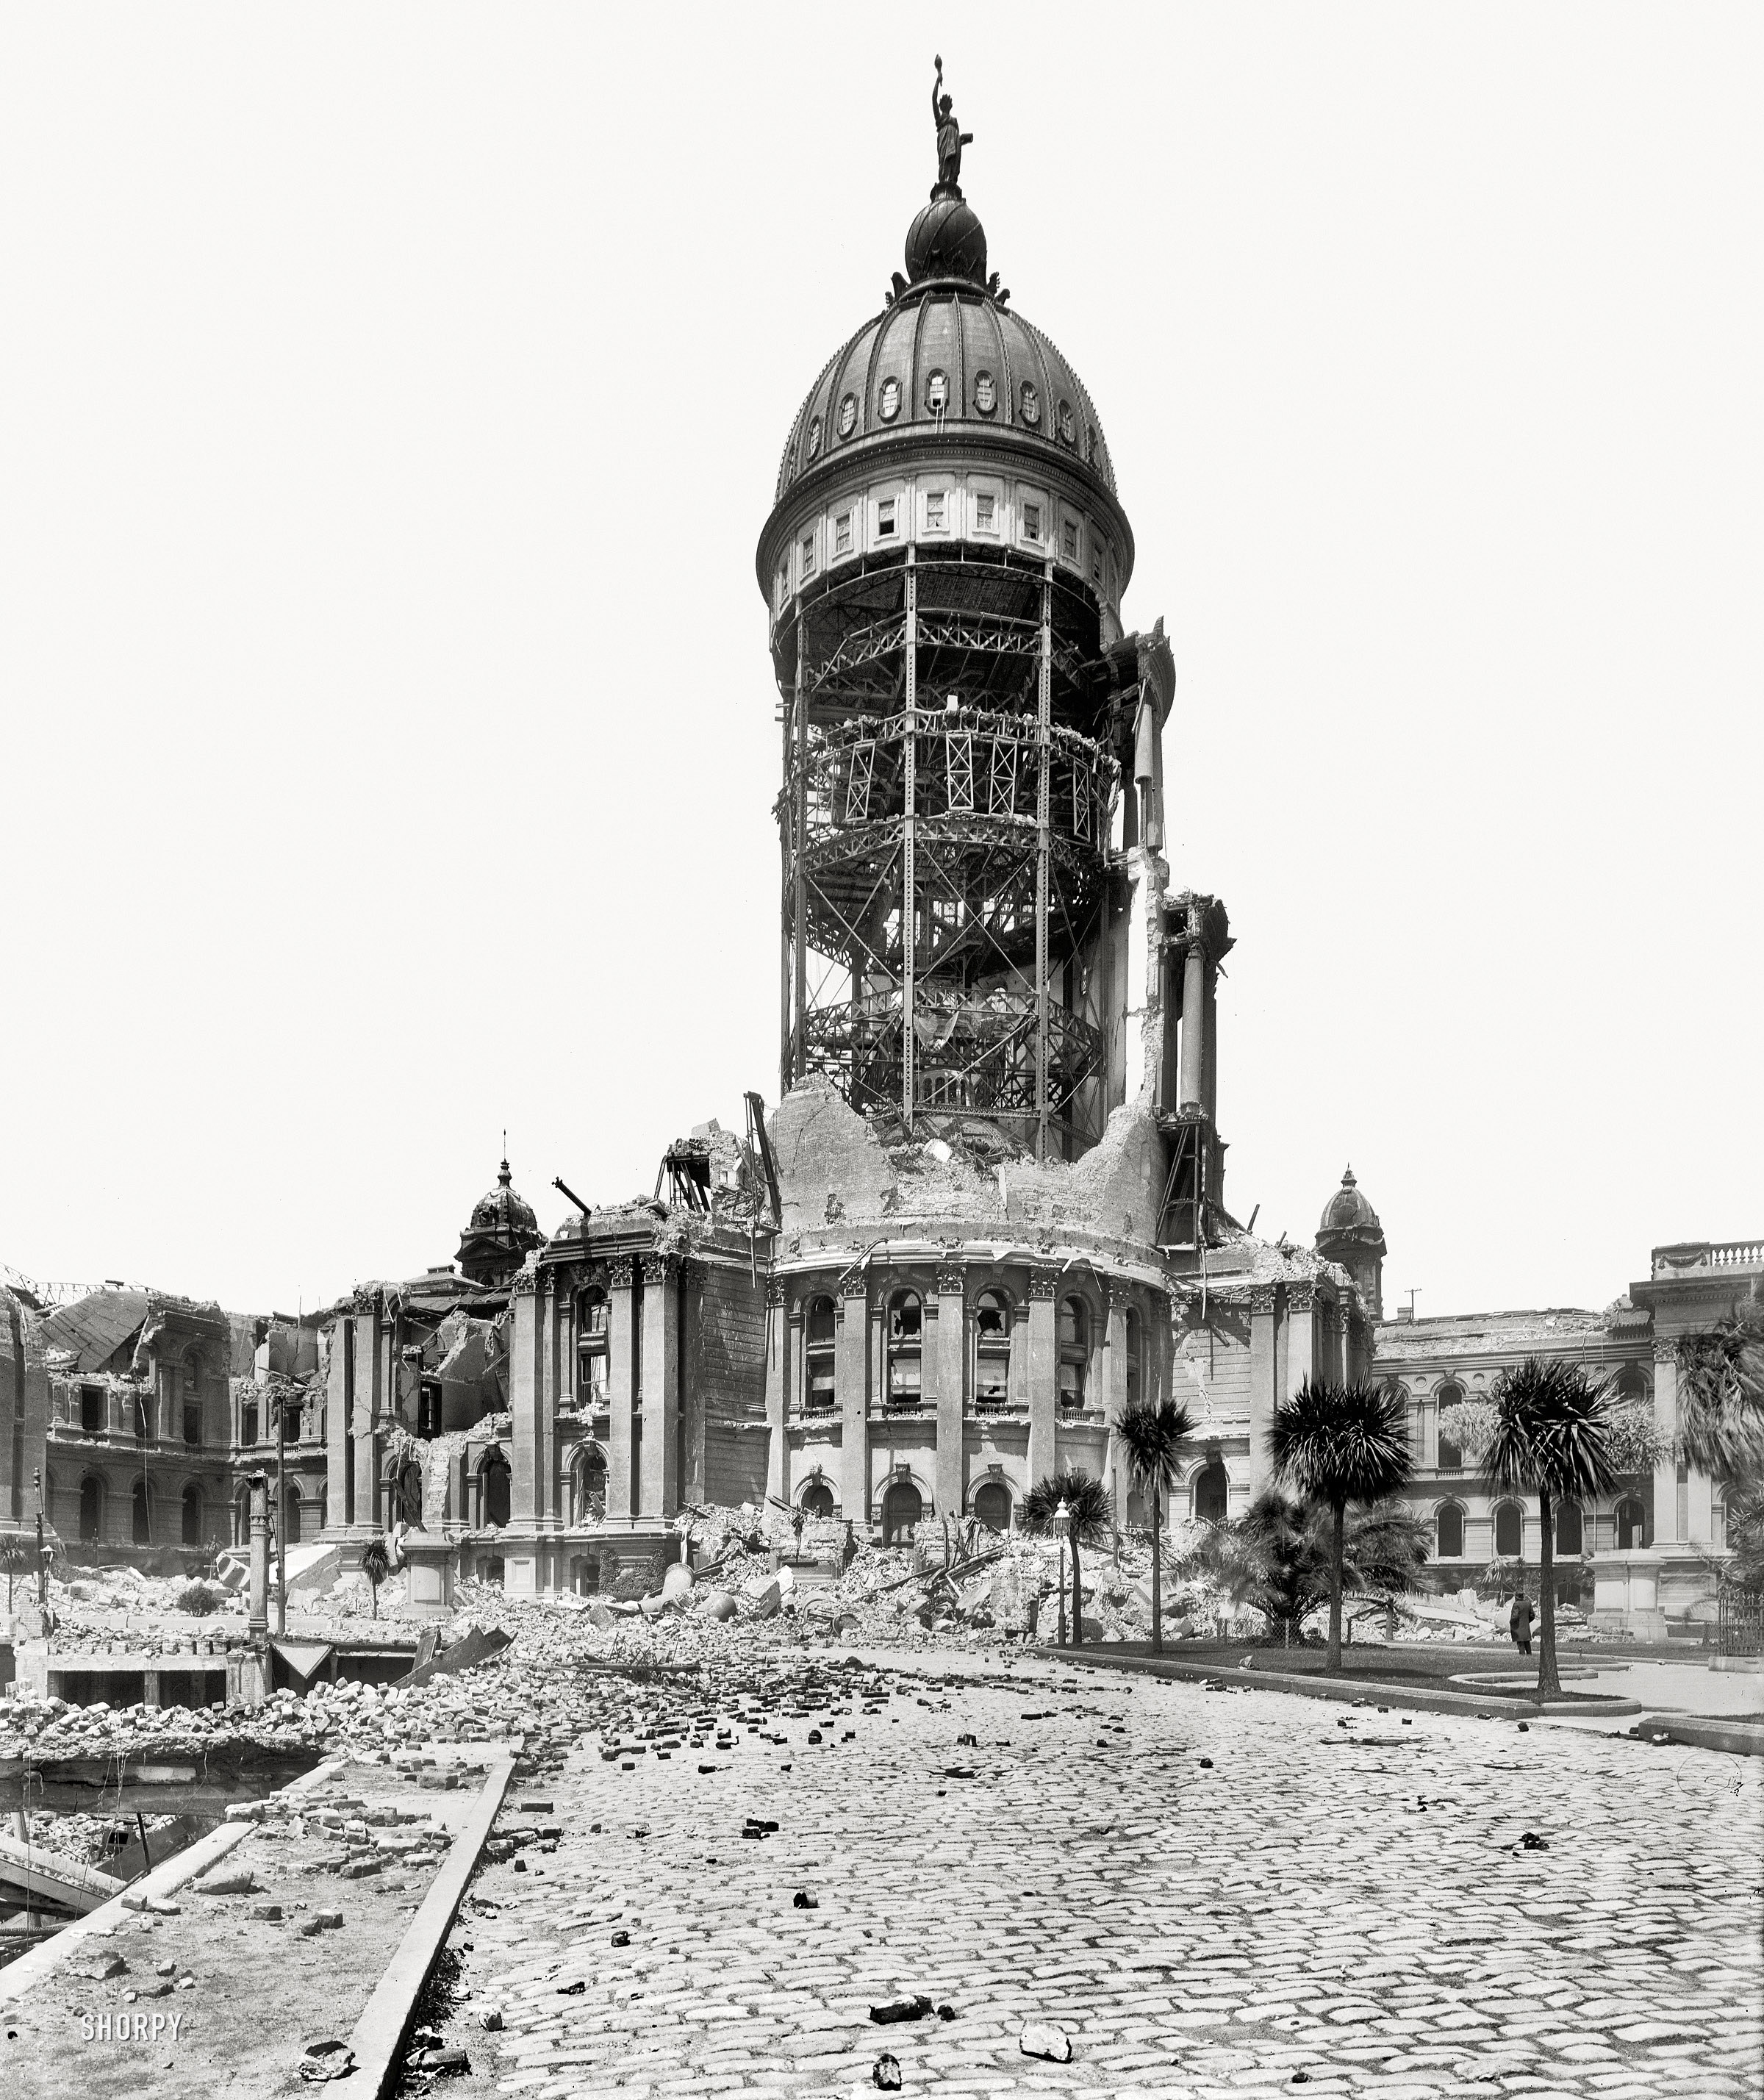 San Francisco, April 1906. "Tower of City Hall after earthquake and fire." 8x10 inch dry plate glass negative, Detroit Publishing Company. View full size.